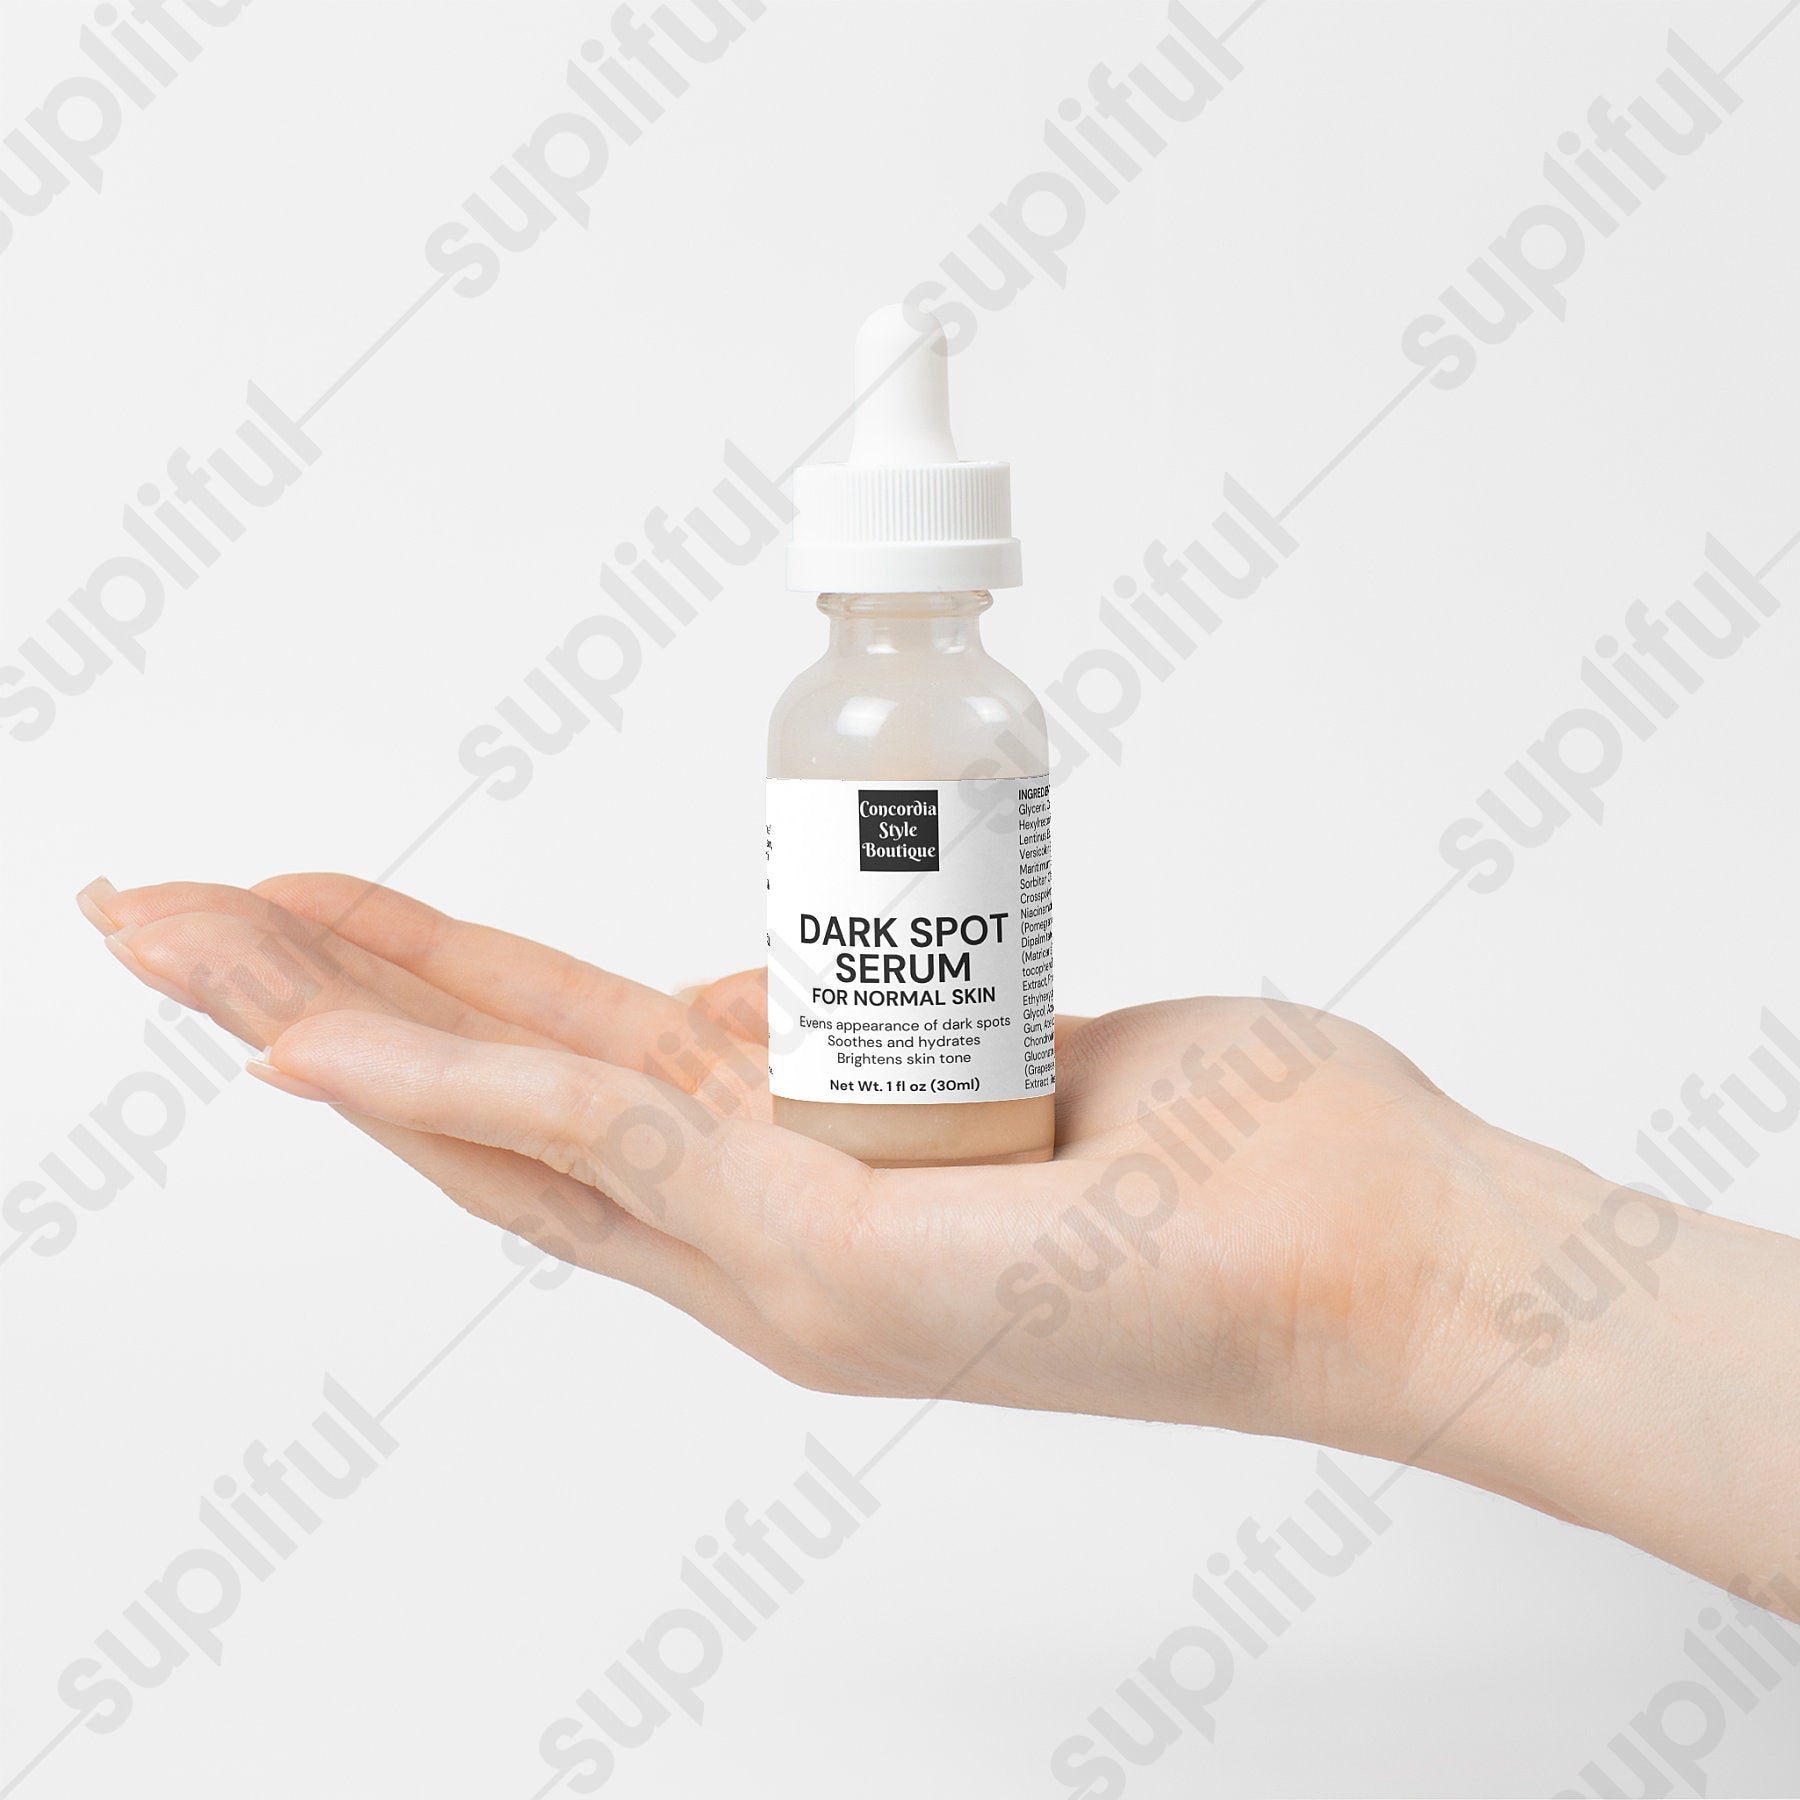 Dark Spot Serum for Normal Skin - Ships exclusively to US - Premium Dark Spot Serum for Normal Skin from Concordia Style Boutique - Just $19.85! Shop now at Concordia Style Boutique